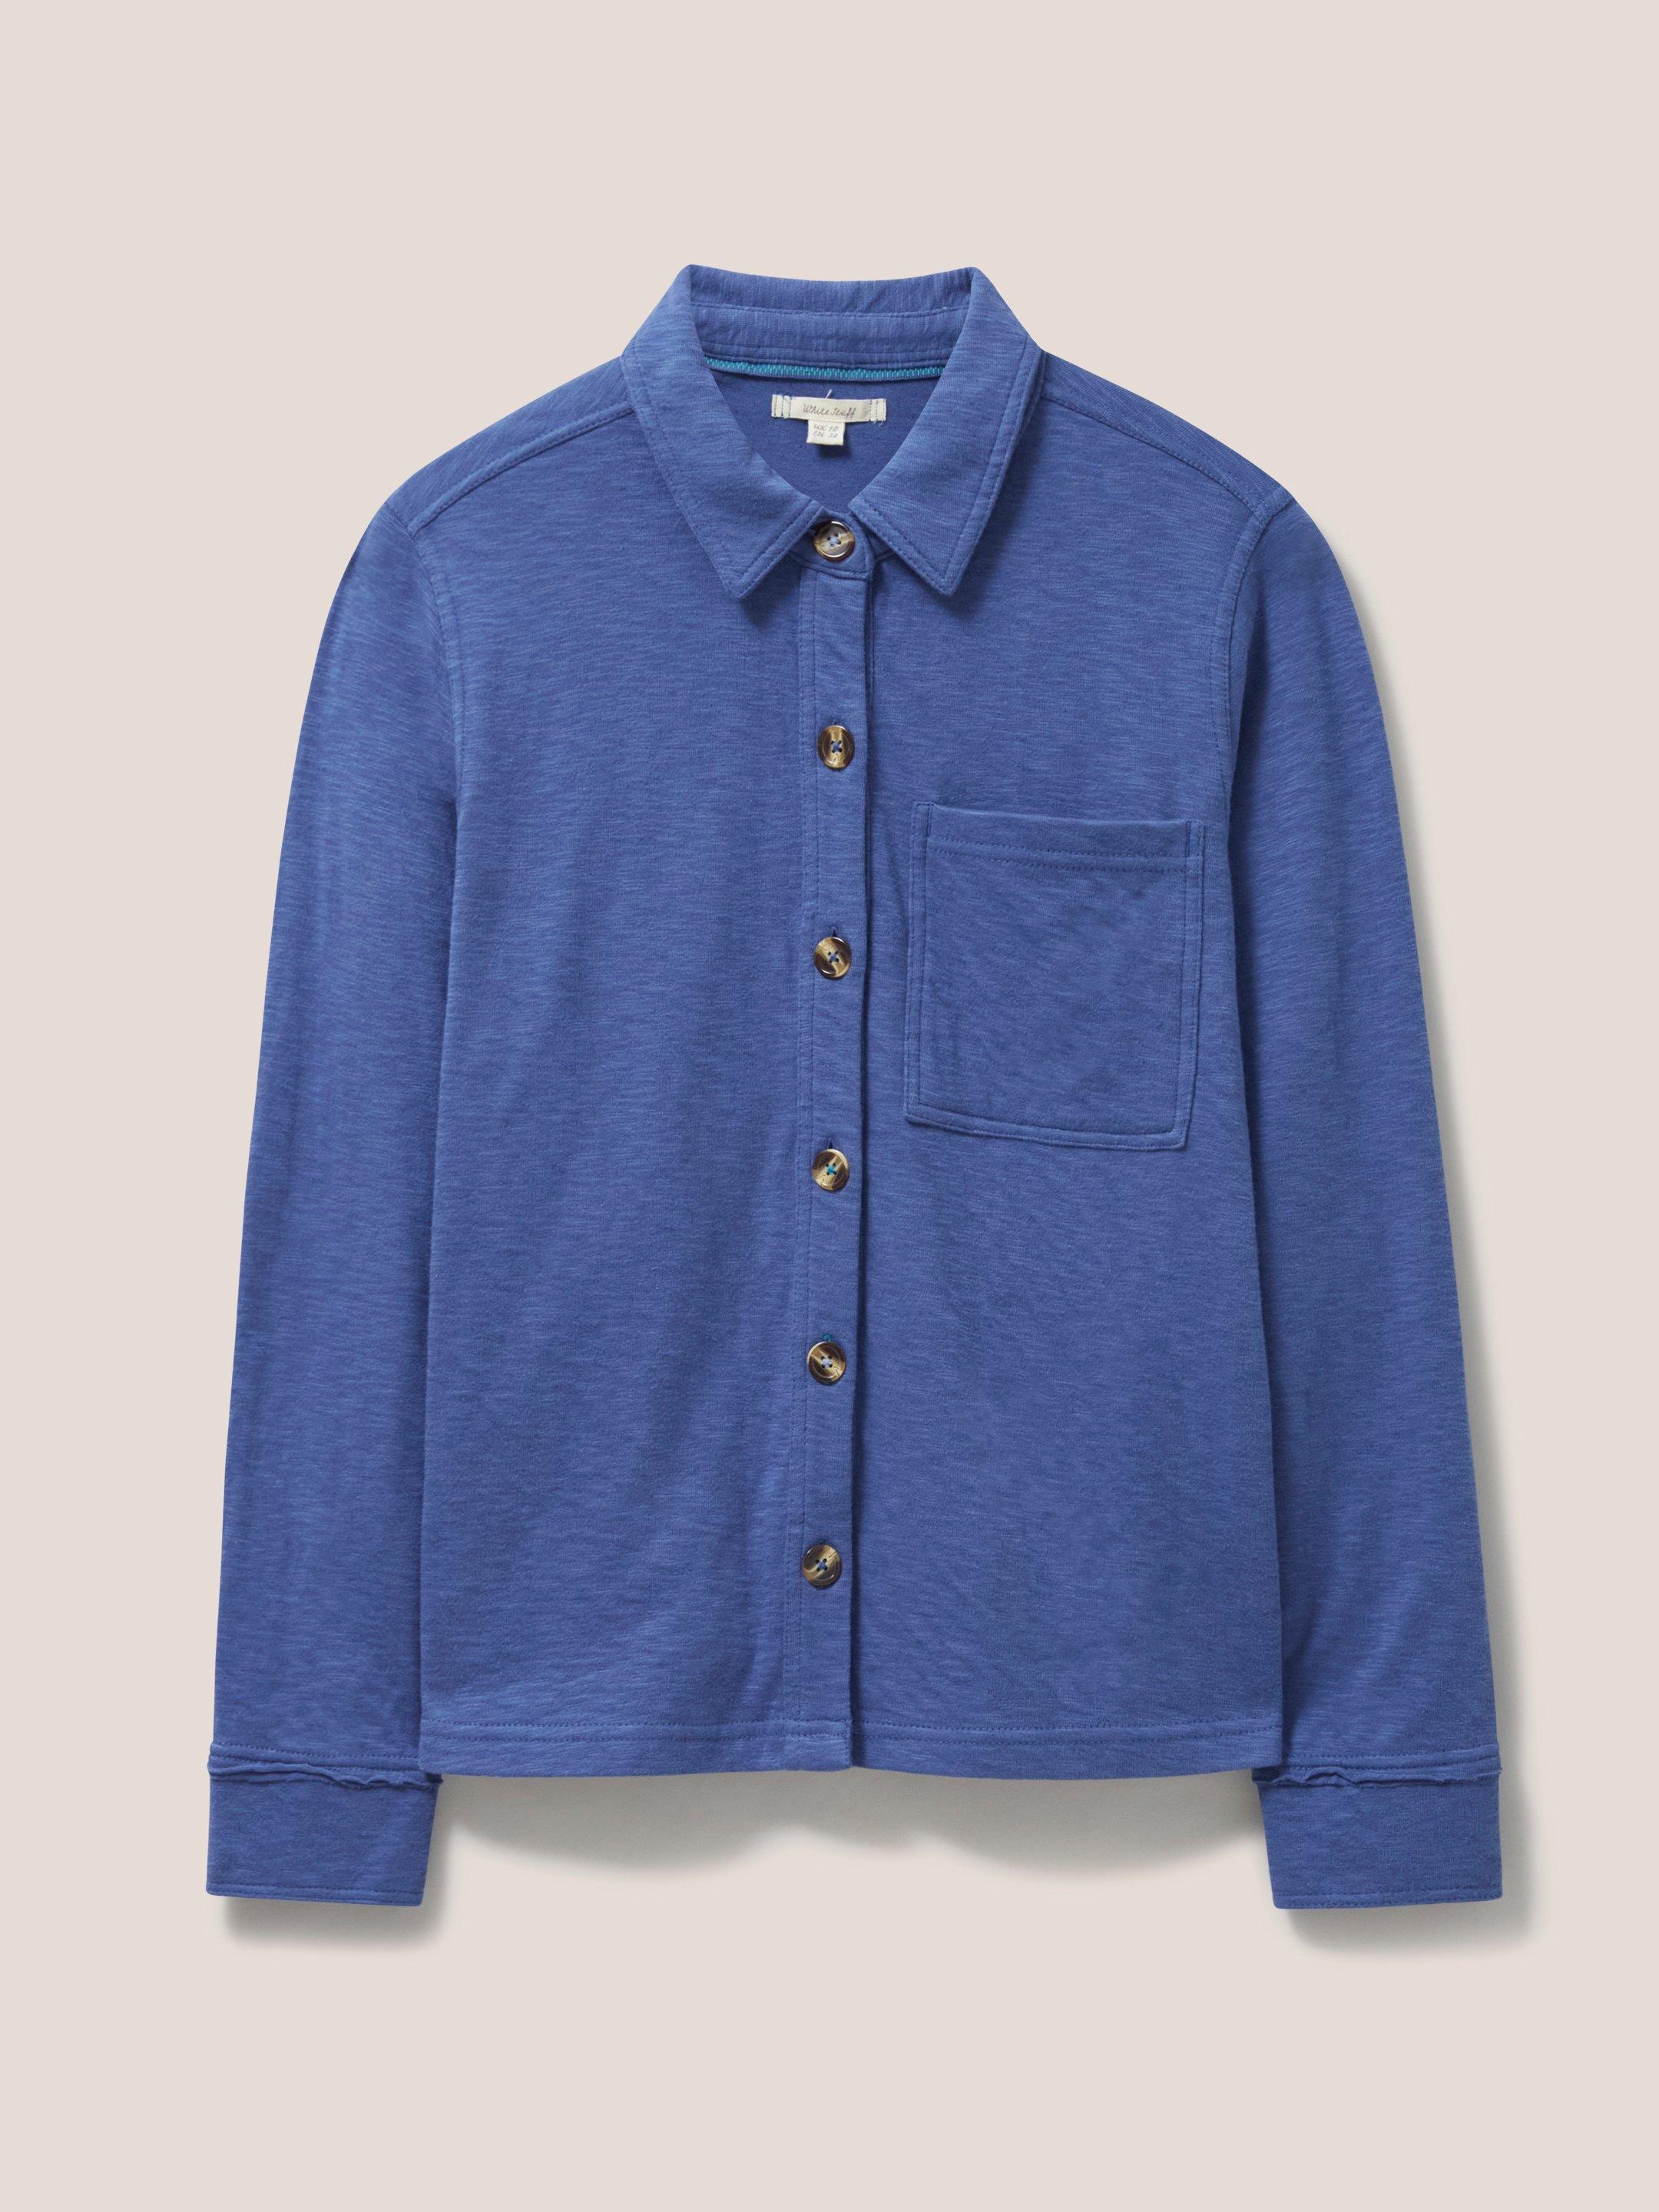 DOUBLE CLOTH JERSEY SHIRT in MID BLUE - FLAT FRONT